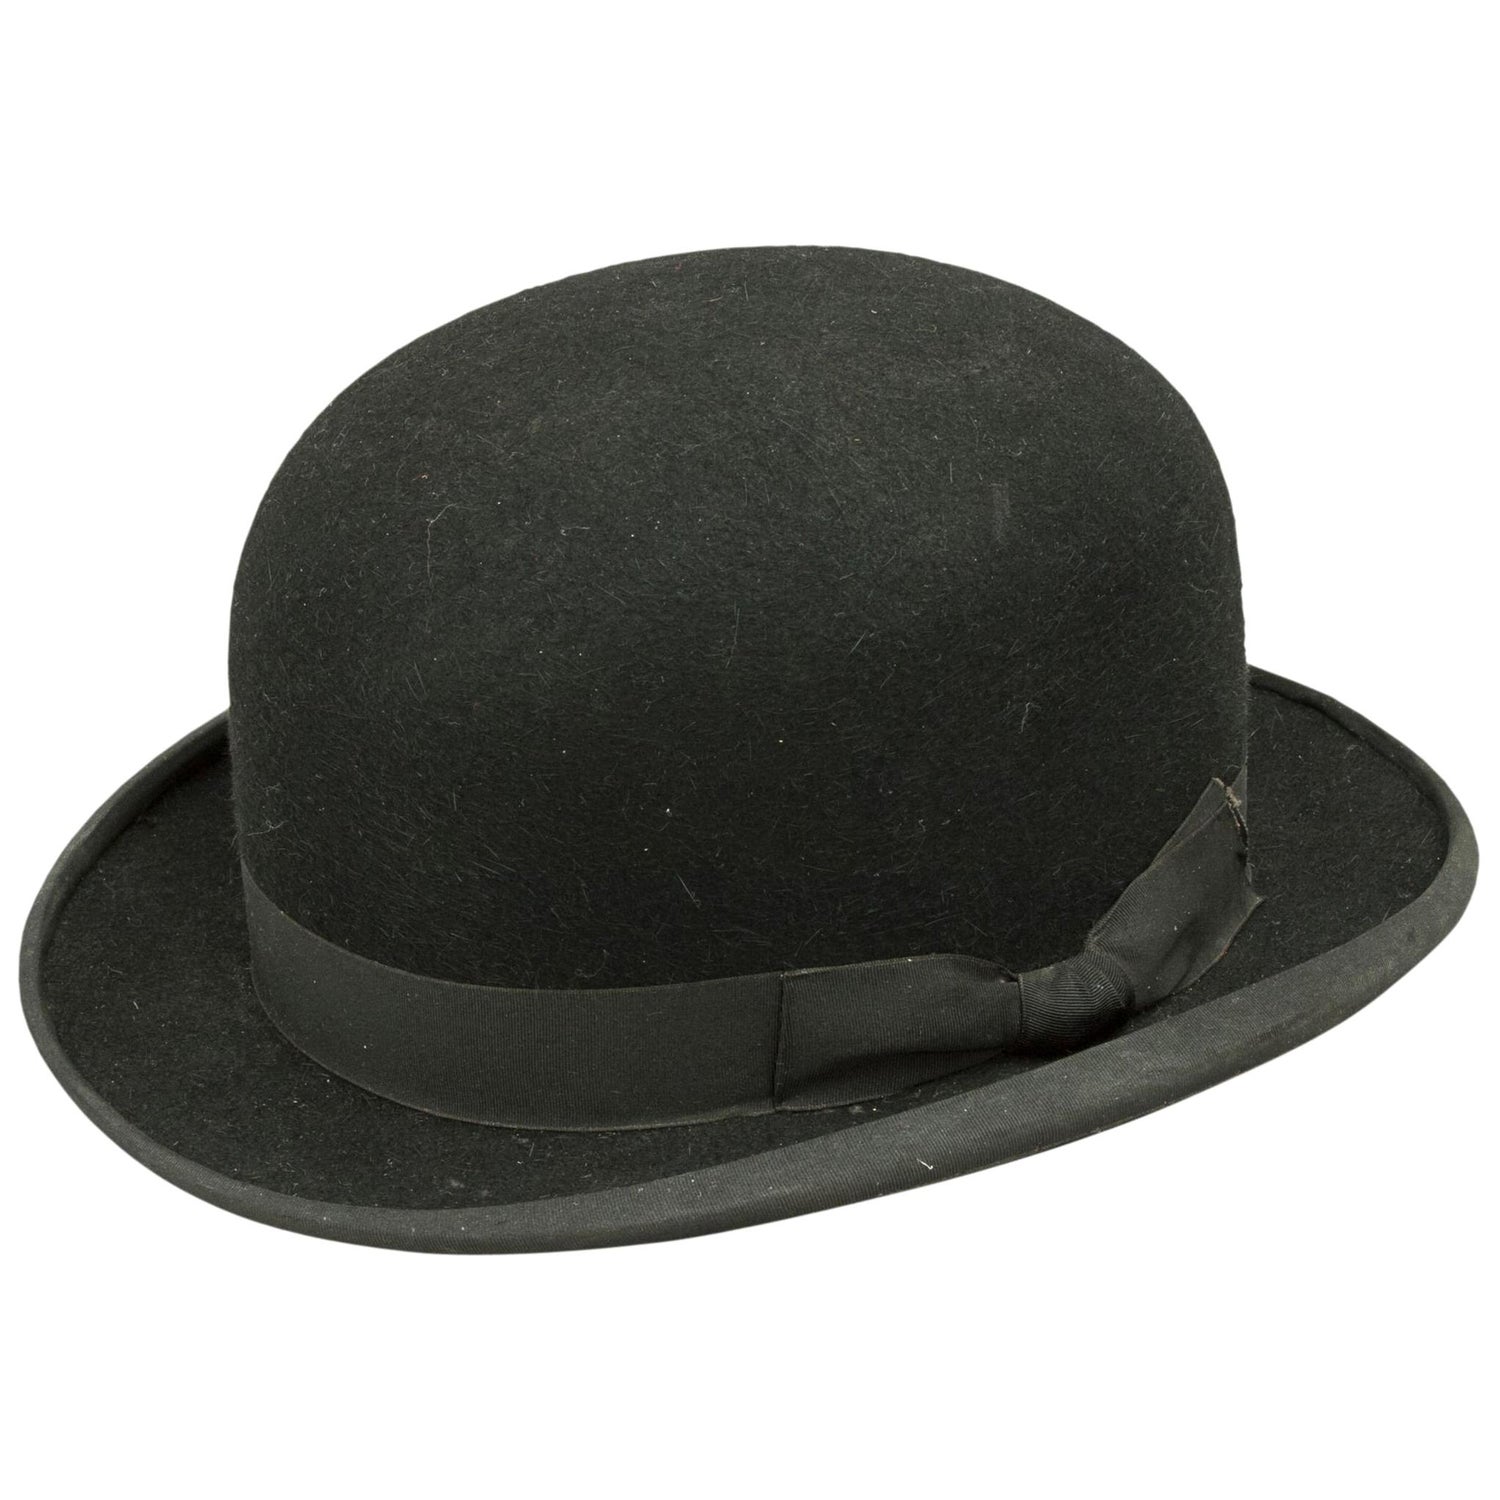 Detail Pictures Of Bowler Hats Nomer 39